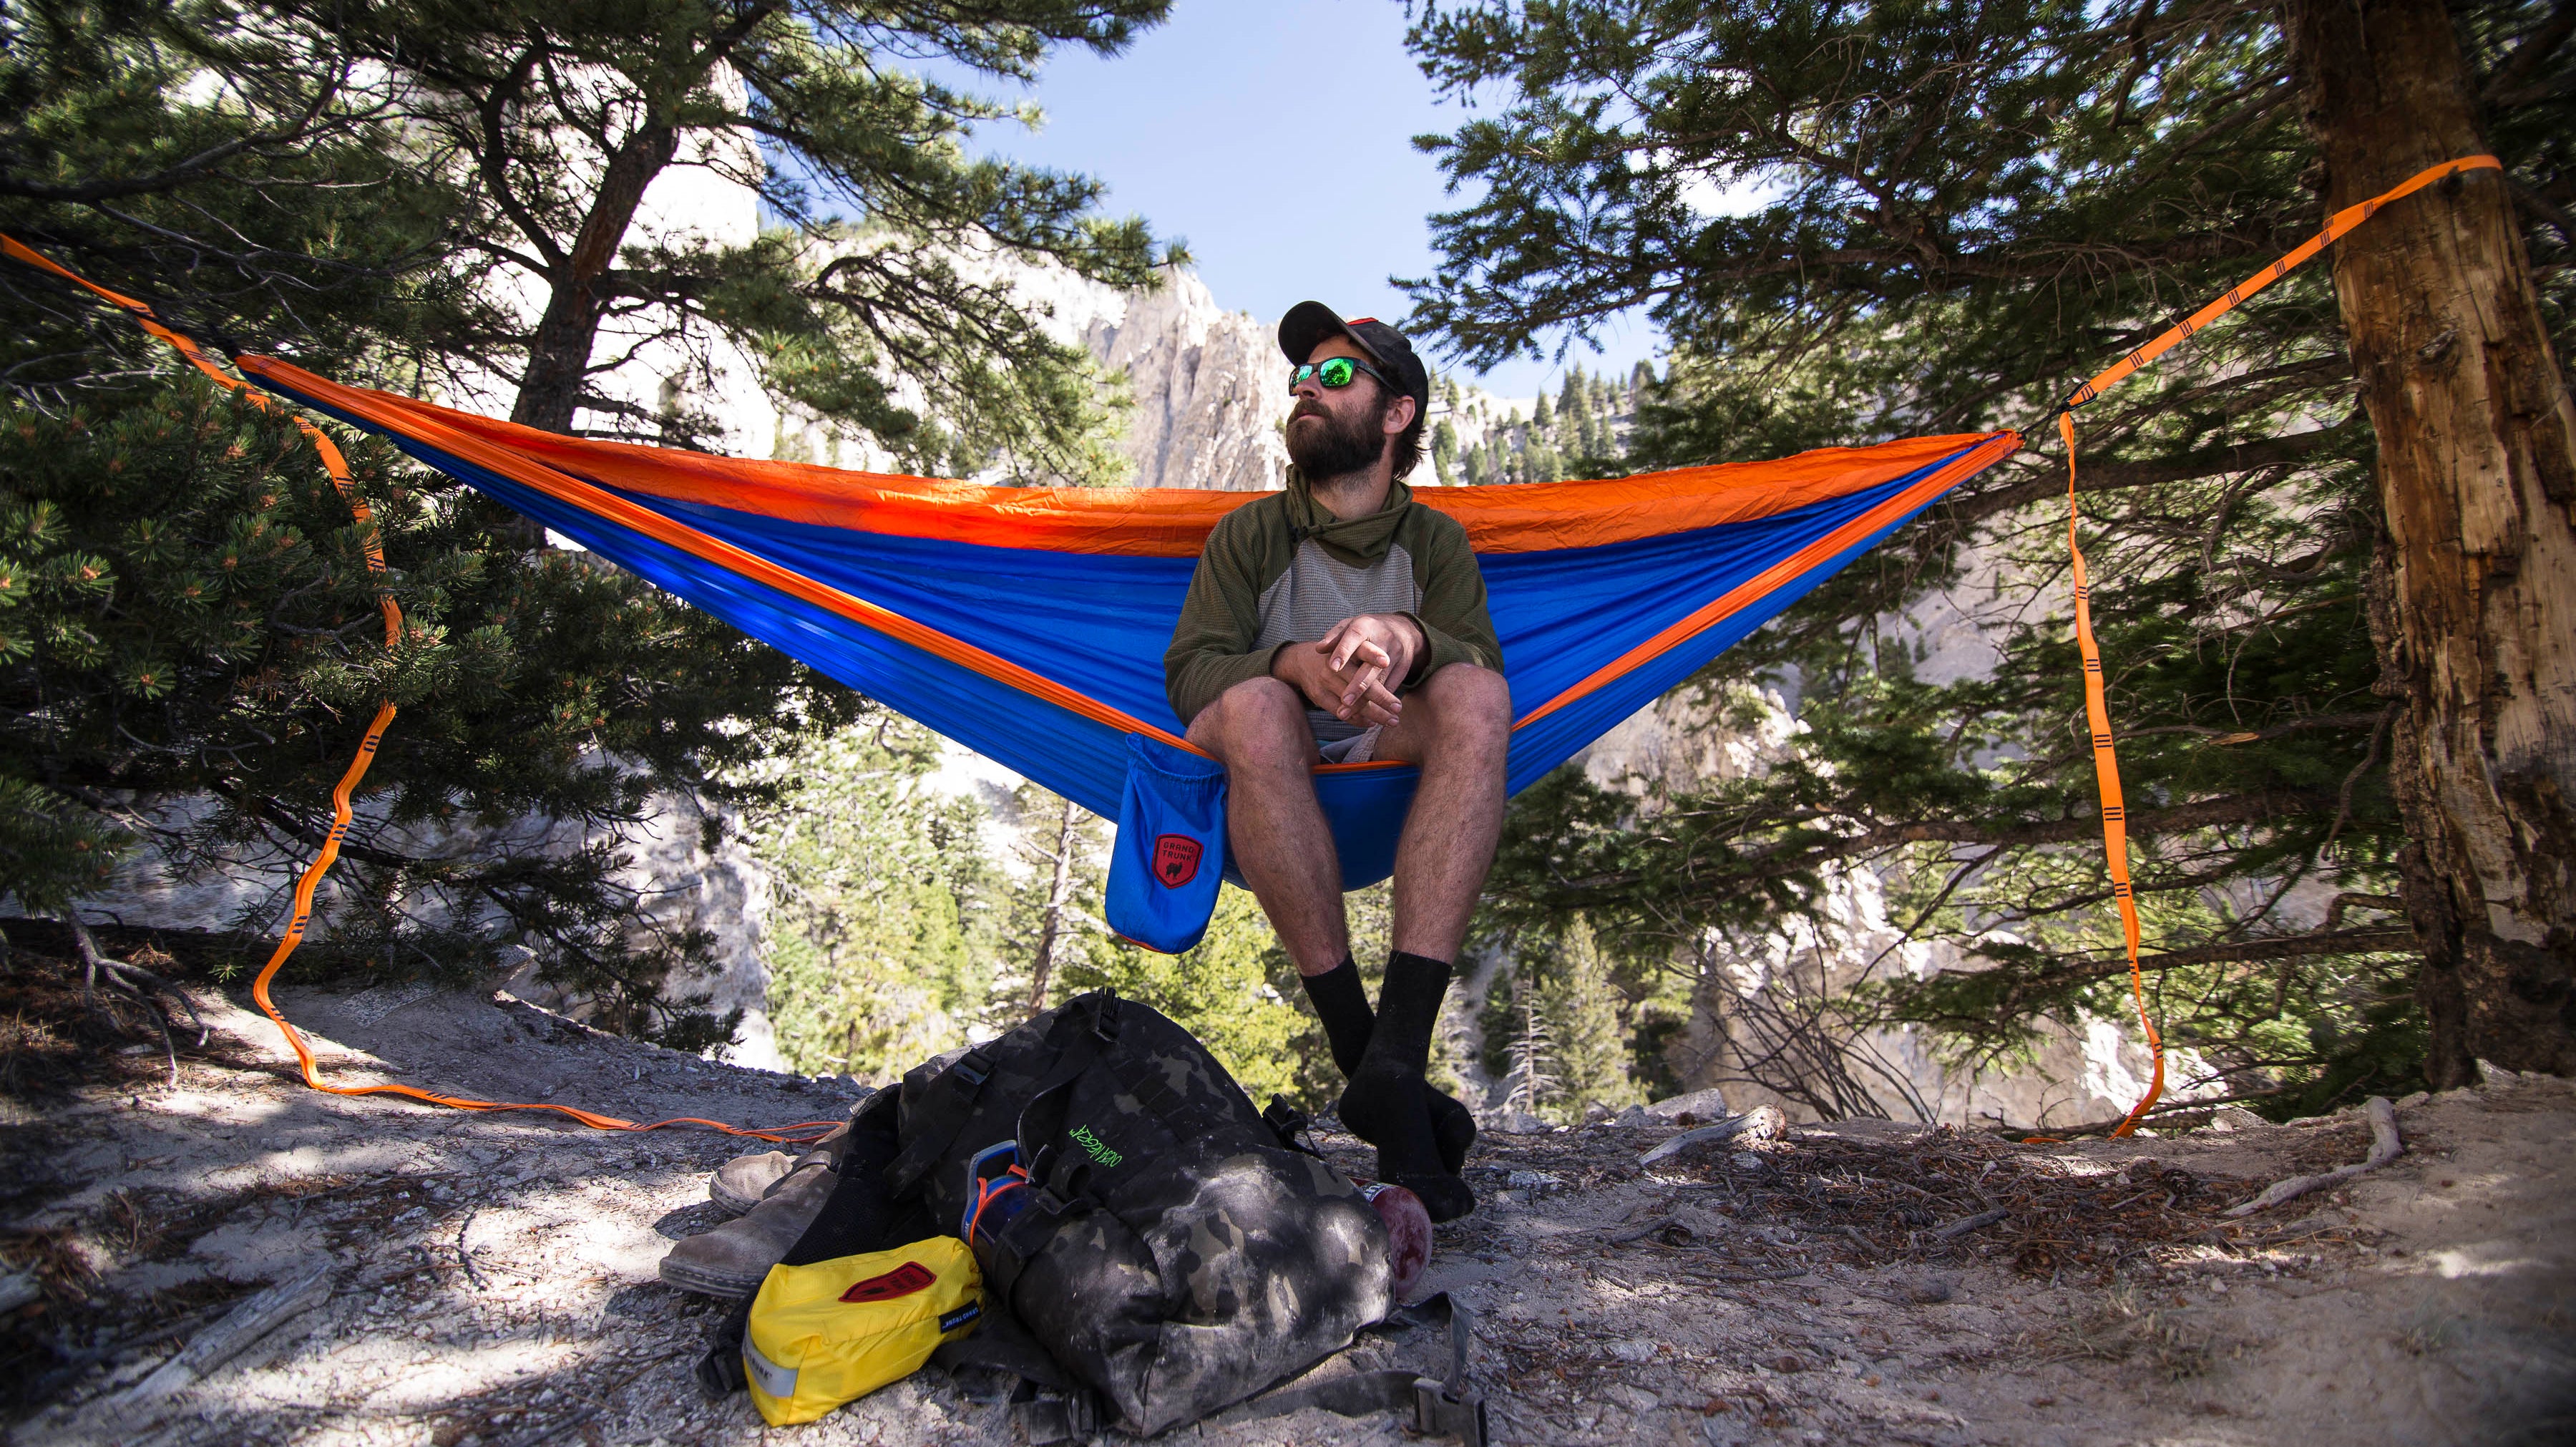 Hammock Safety - Where to Hang...